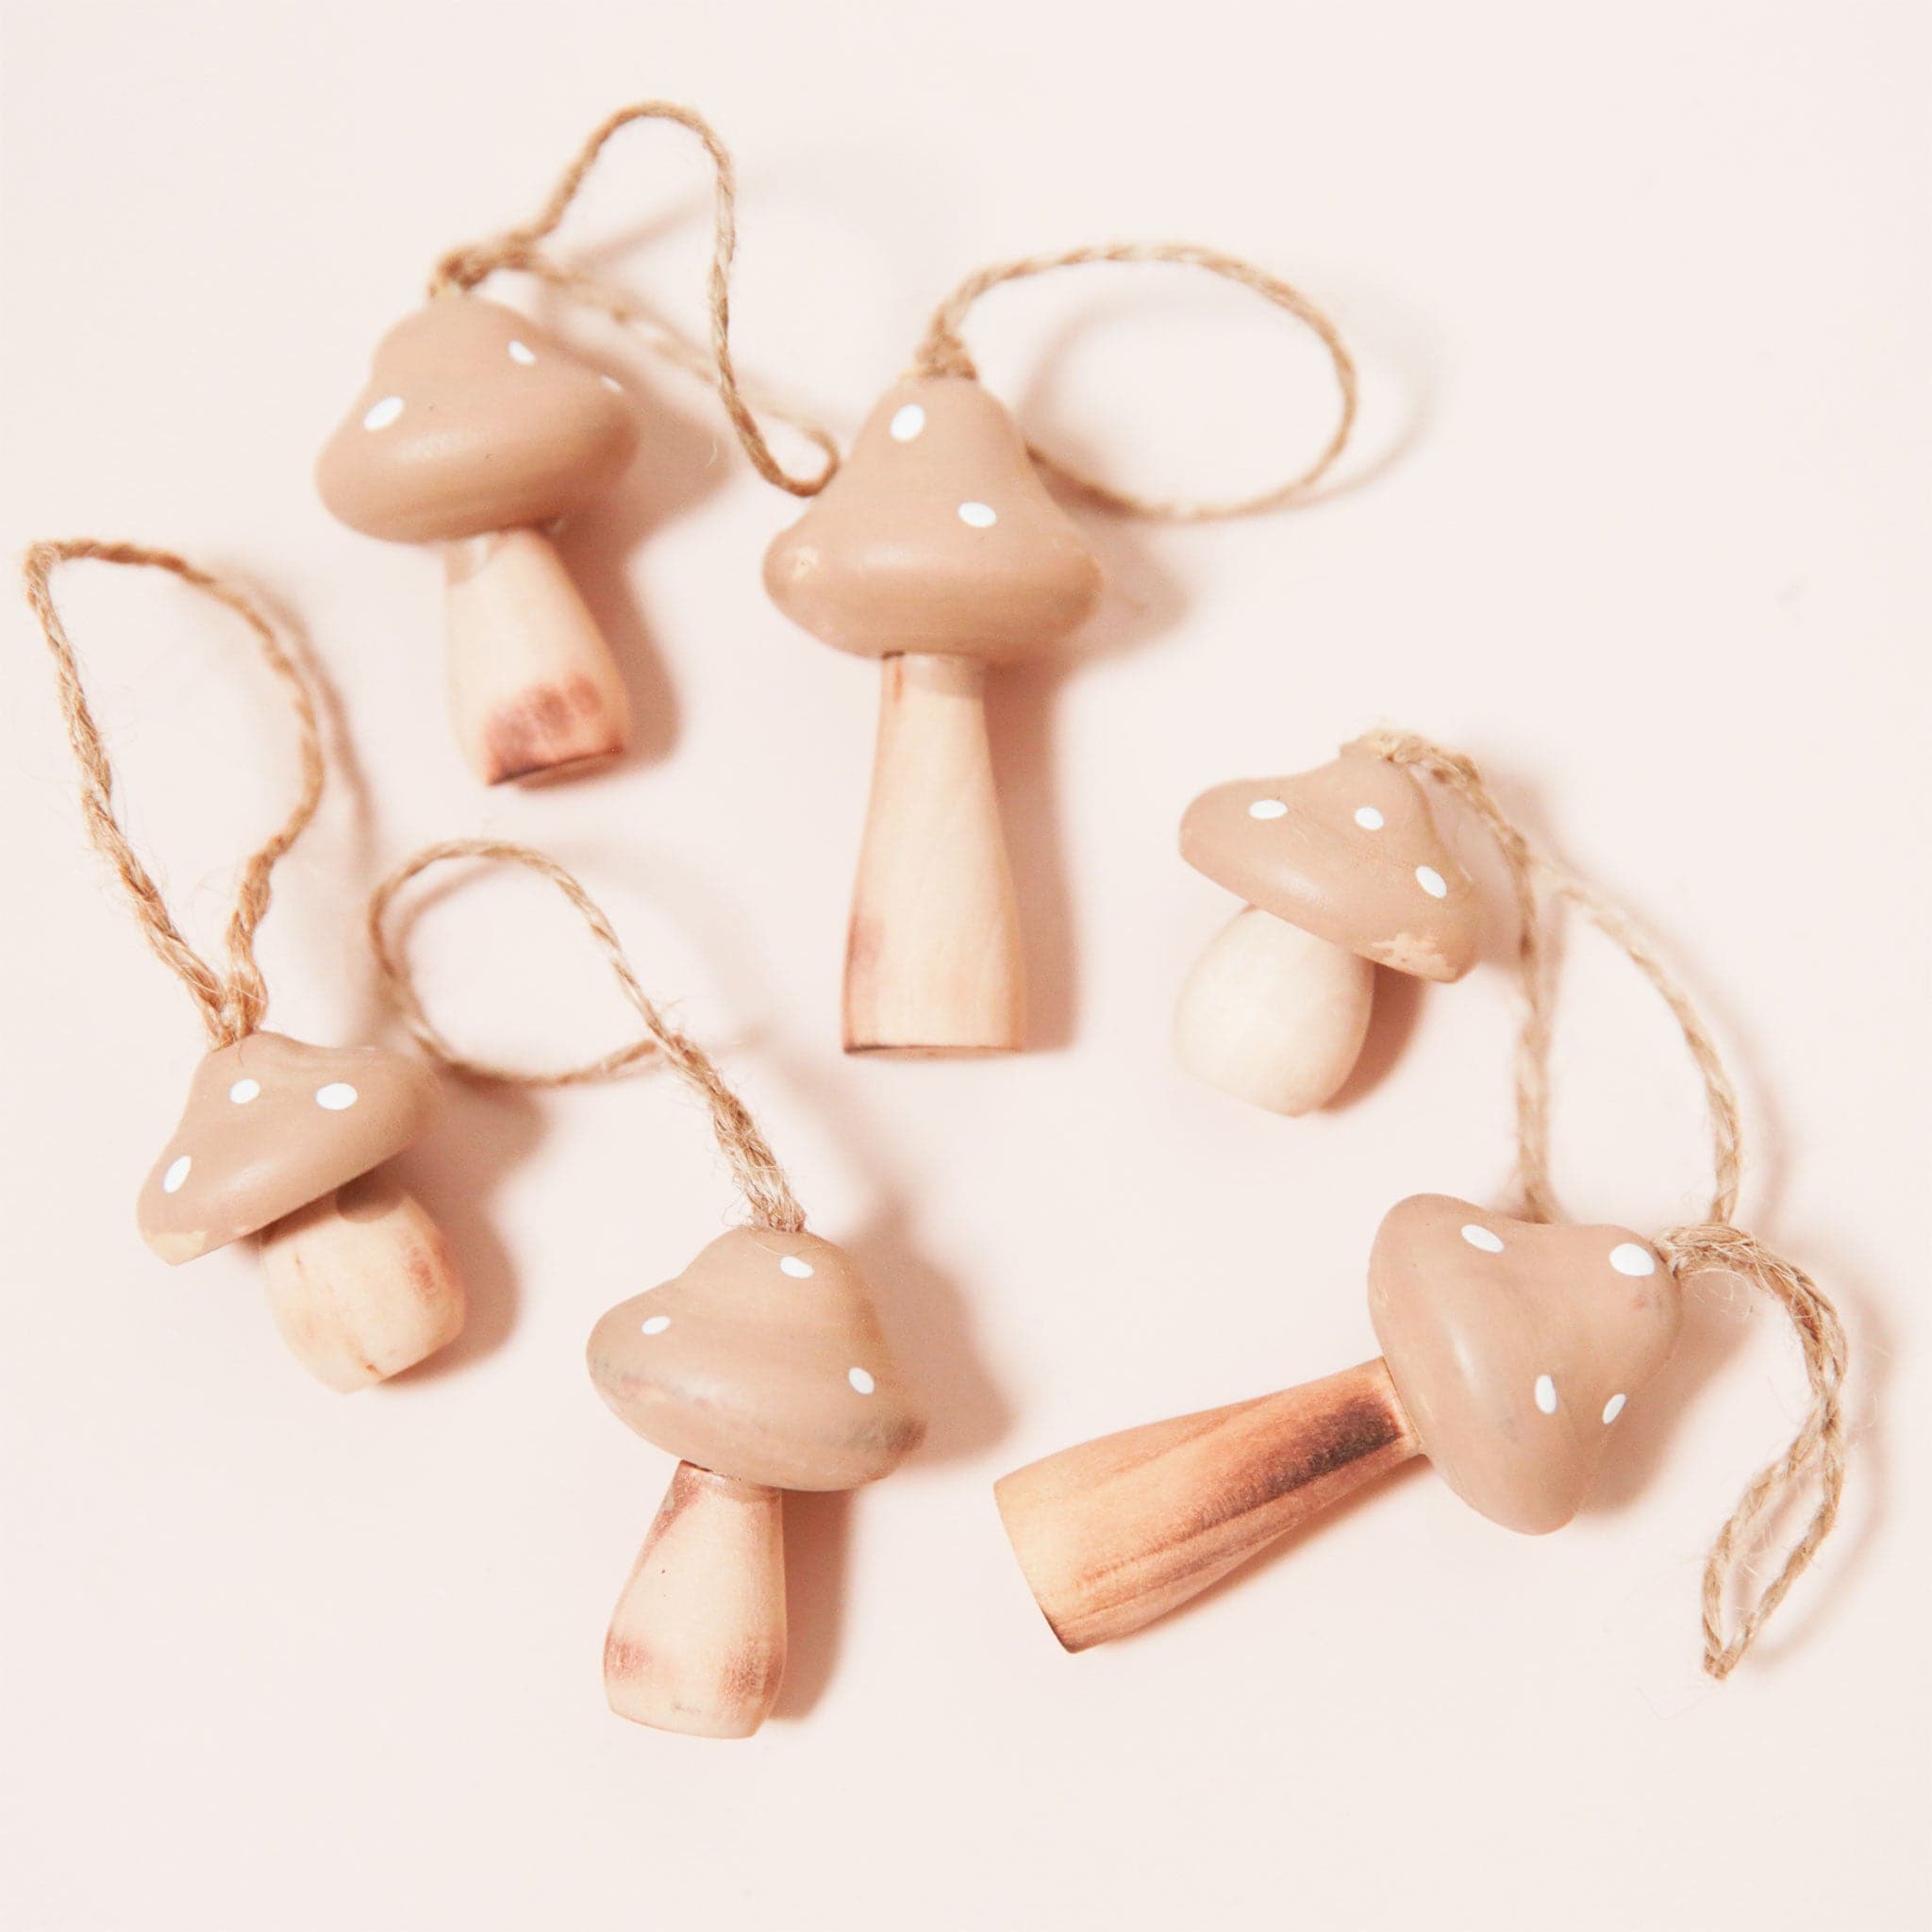 A set of 6 wooden mushroom ornaments, each a slightly differently size and shape. They have a neutral tan top with white spots and a natural wooden stem. Each ornament has an attached twine loop at the top for easy hanging. 